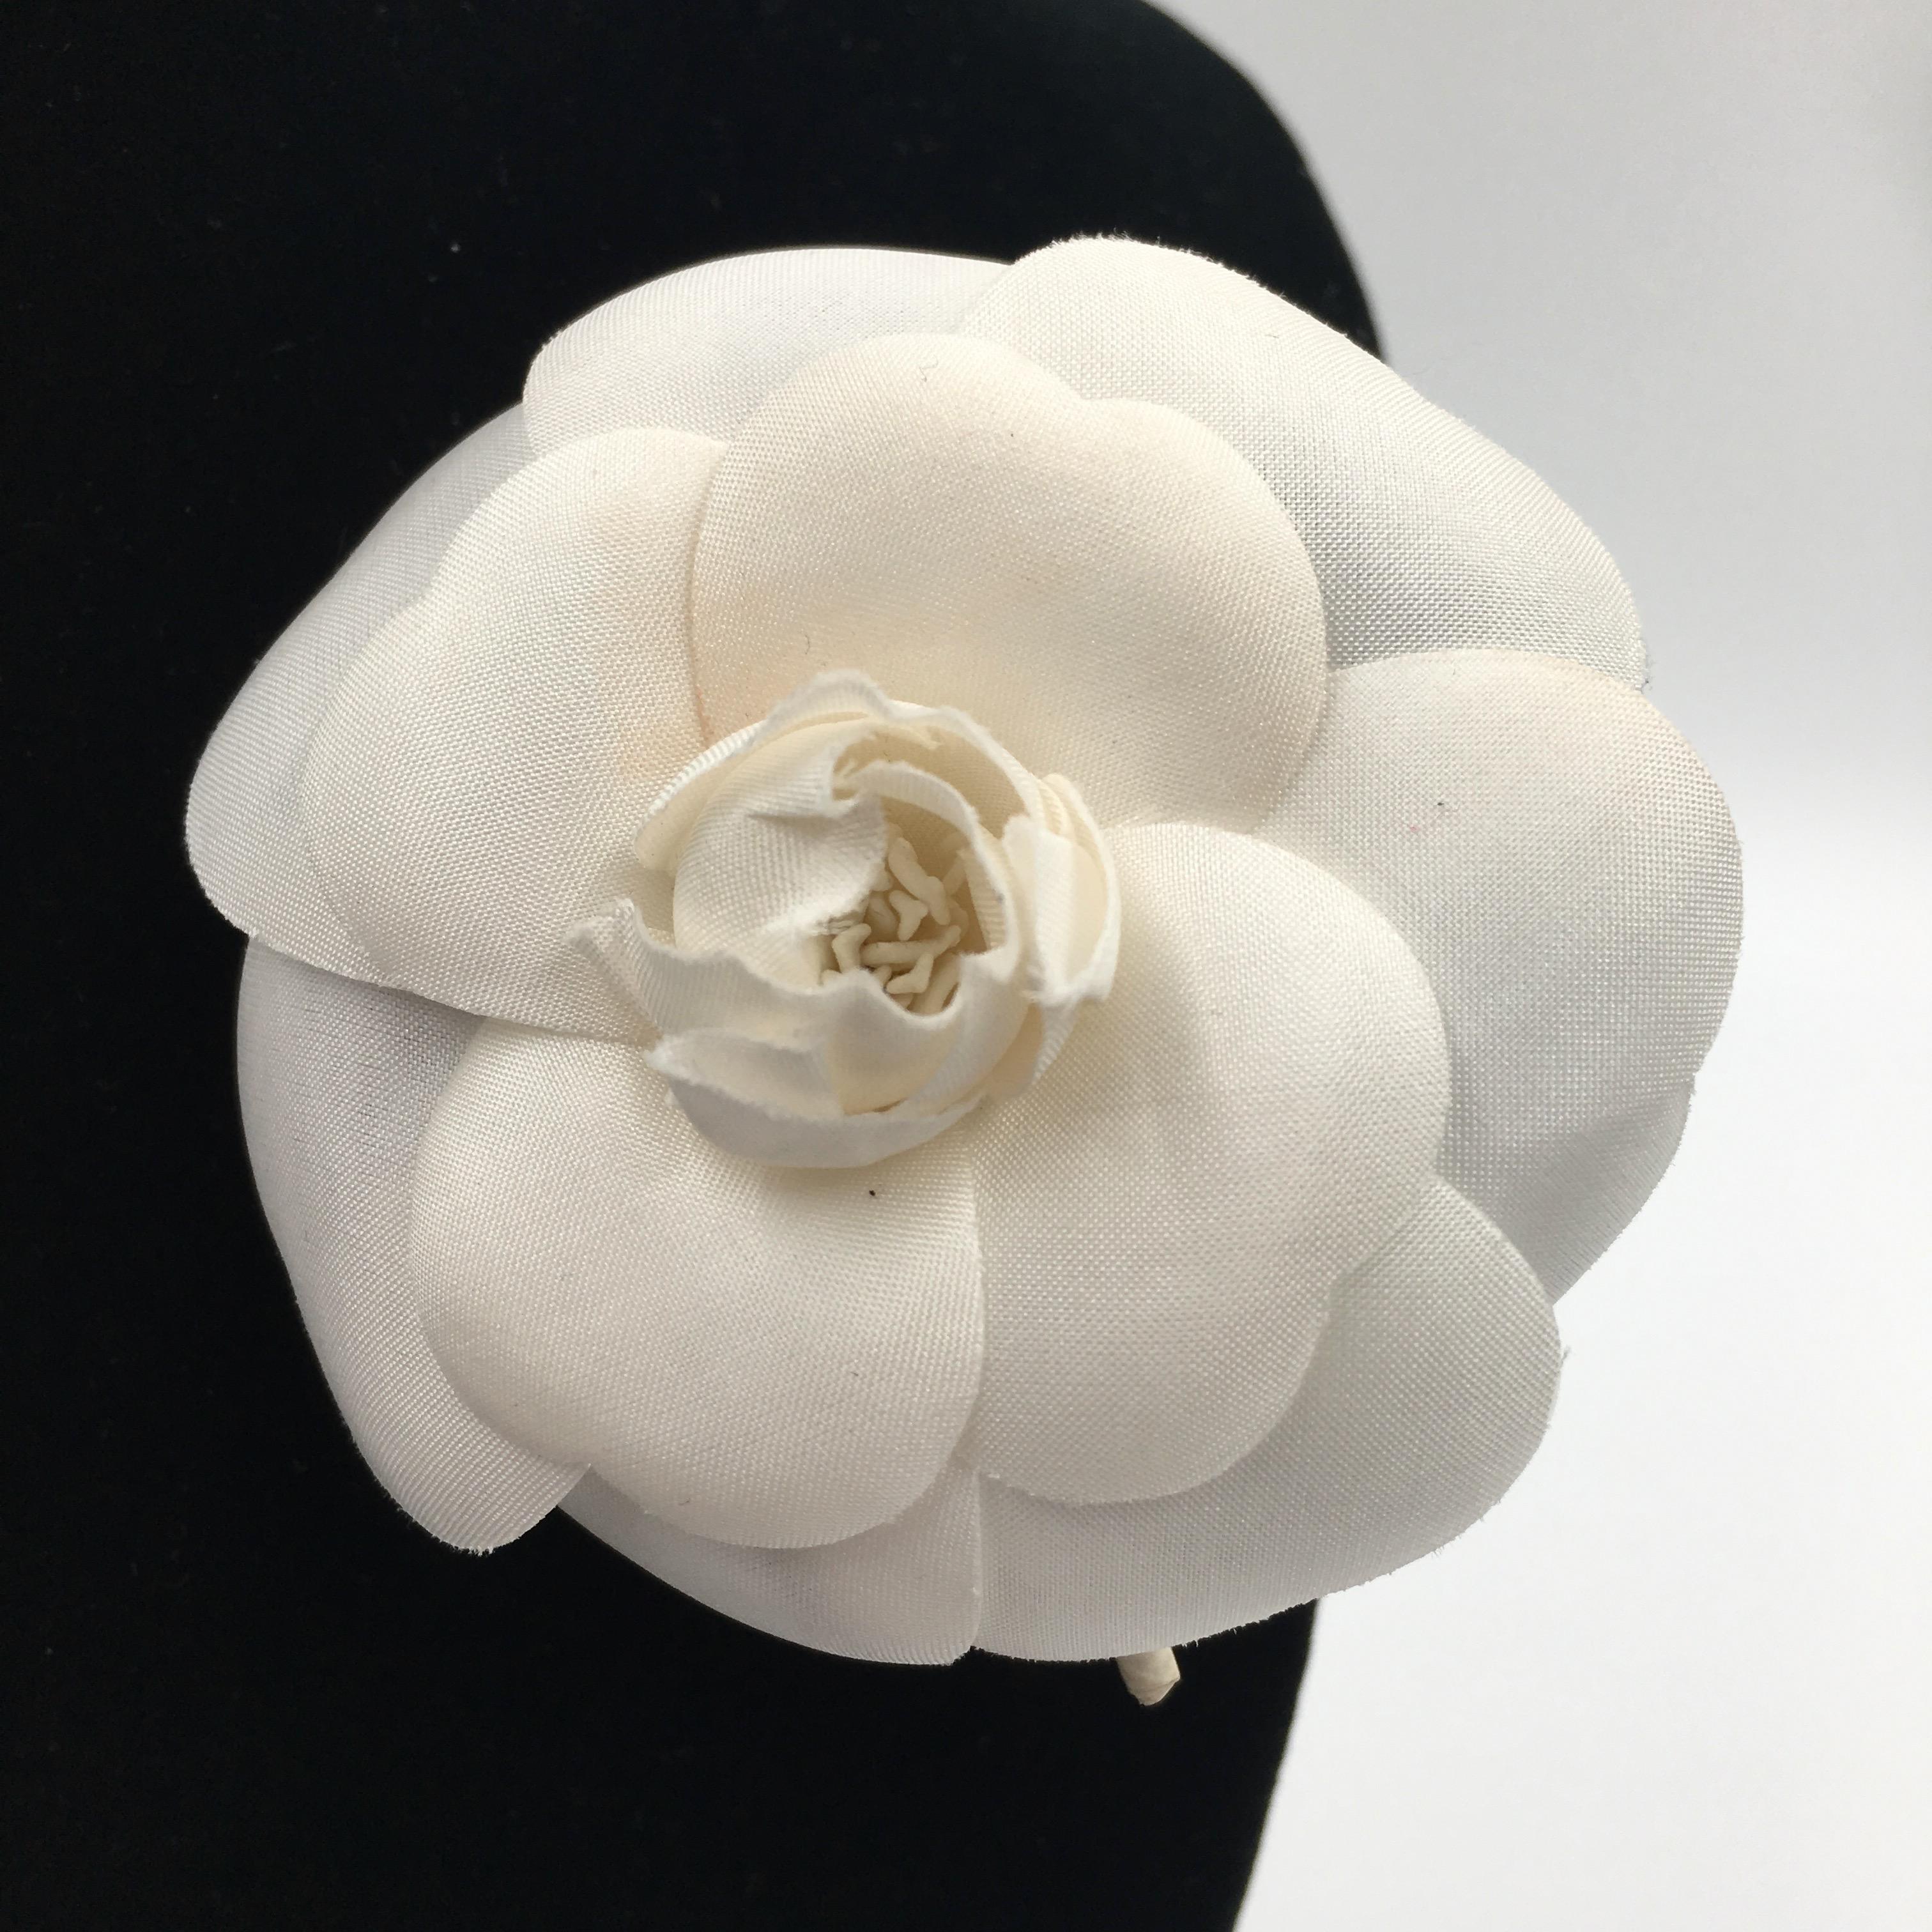 Chanel White Silk Camellia Brooch .  Chanel tag attached to back by pin backing. 
Chanel box not included

Good vintage condition.

Measurements are as follows:

Flower width 2 3/4